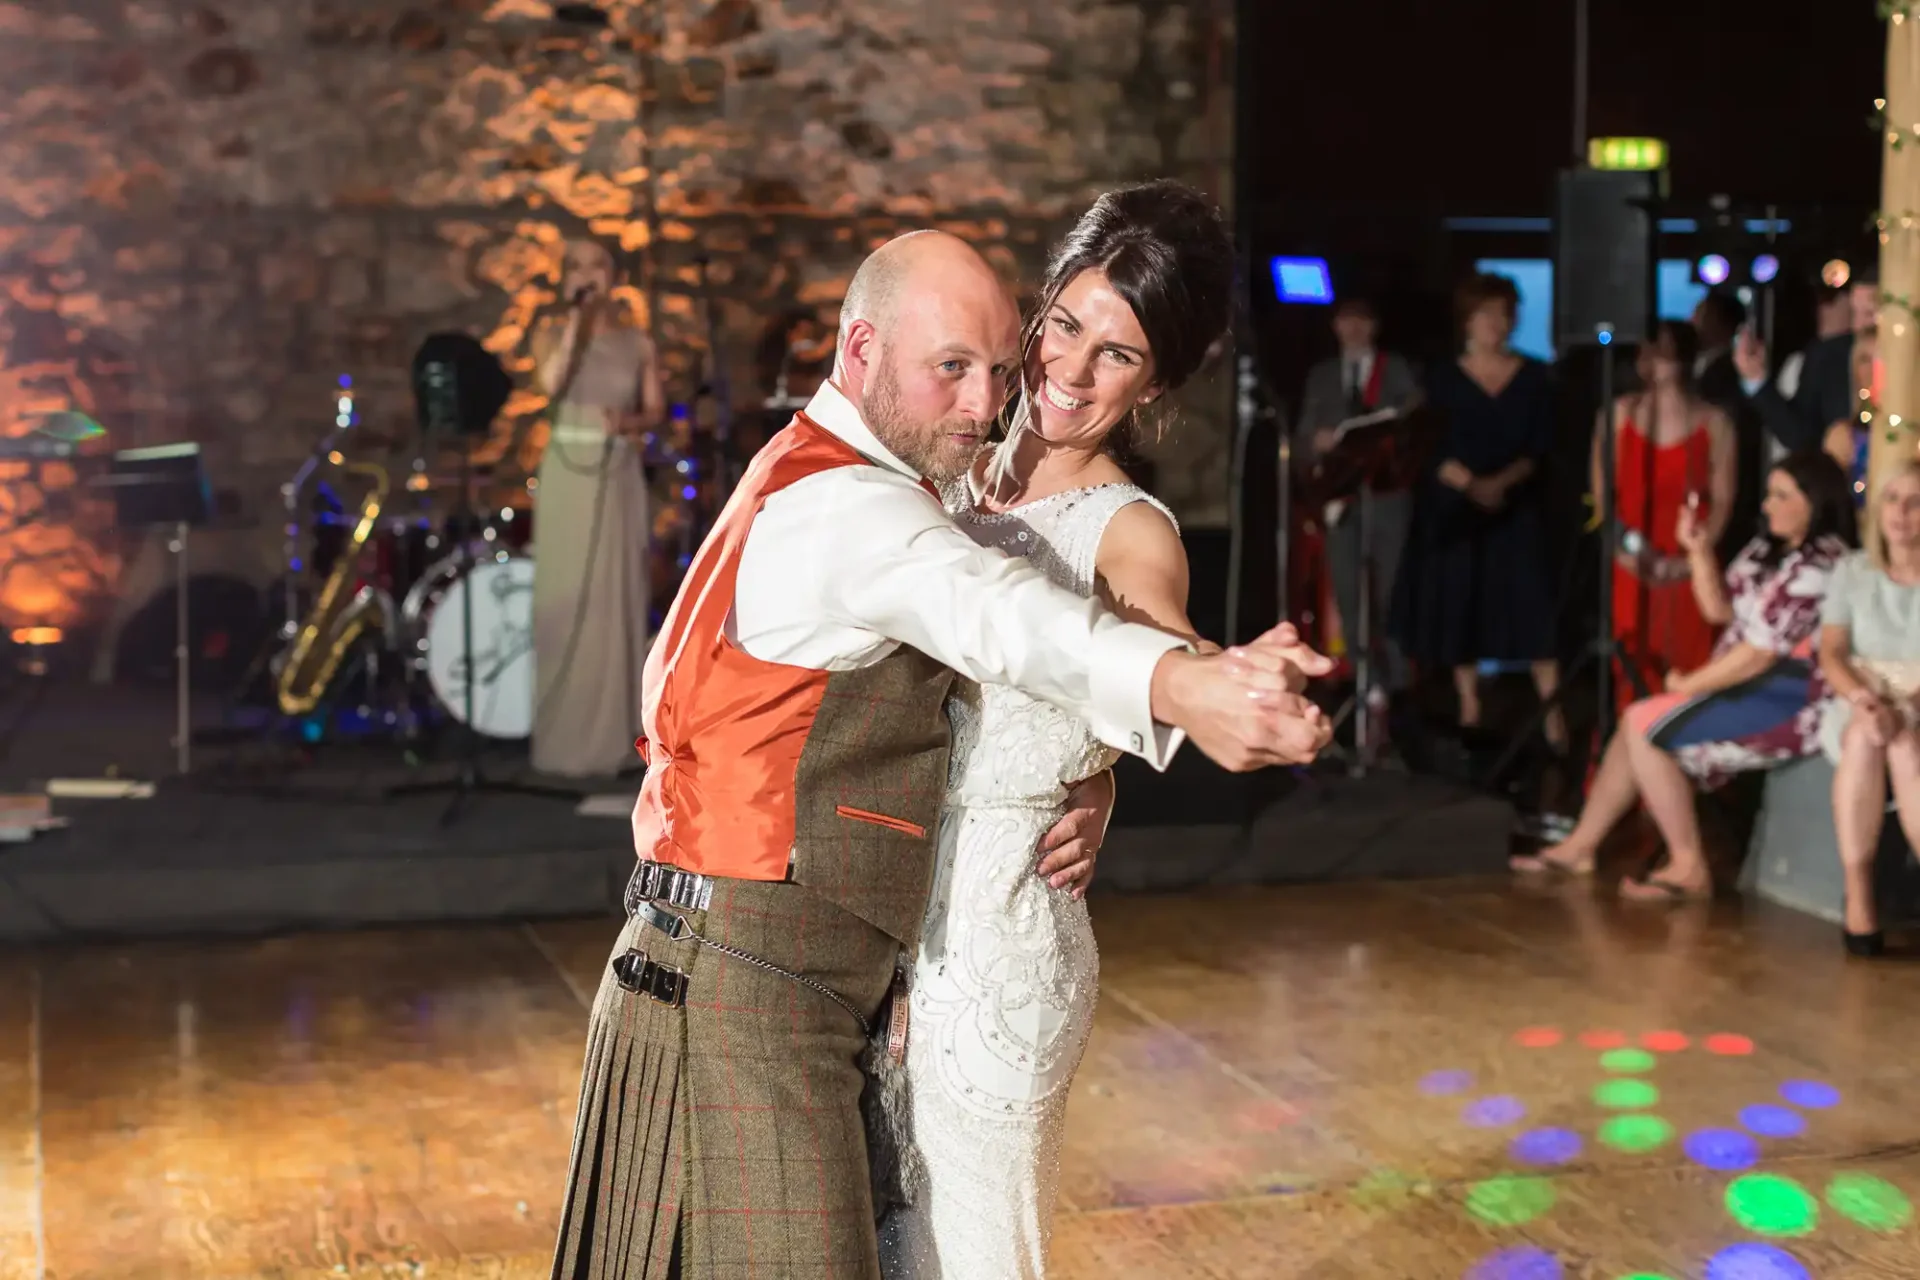 A couple dances closely at a wedding reception, the man in a kilt and the woman in a white dress, with guests and a band in the background.